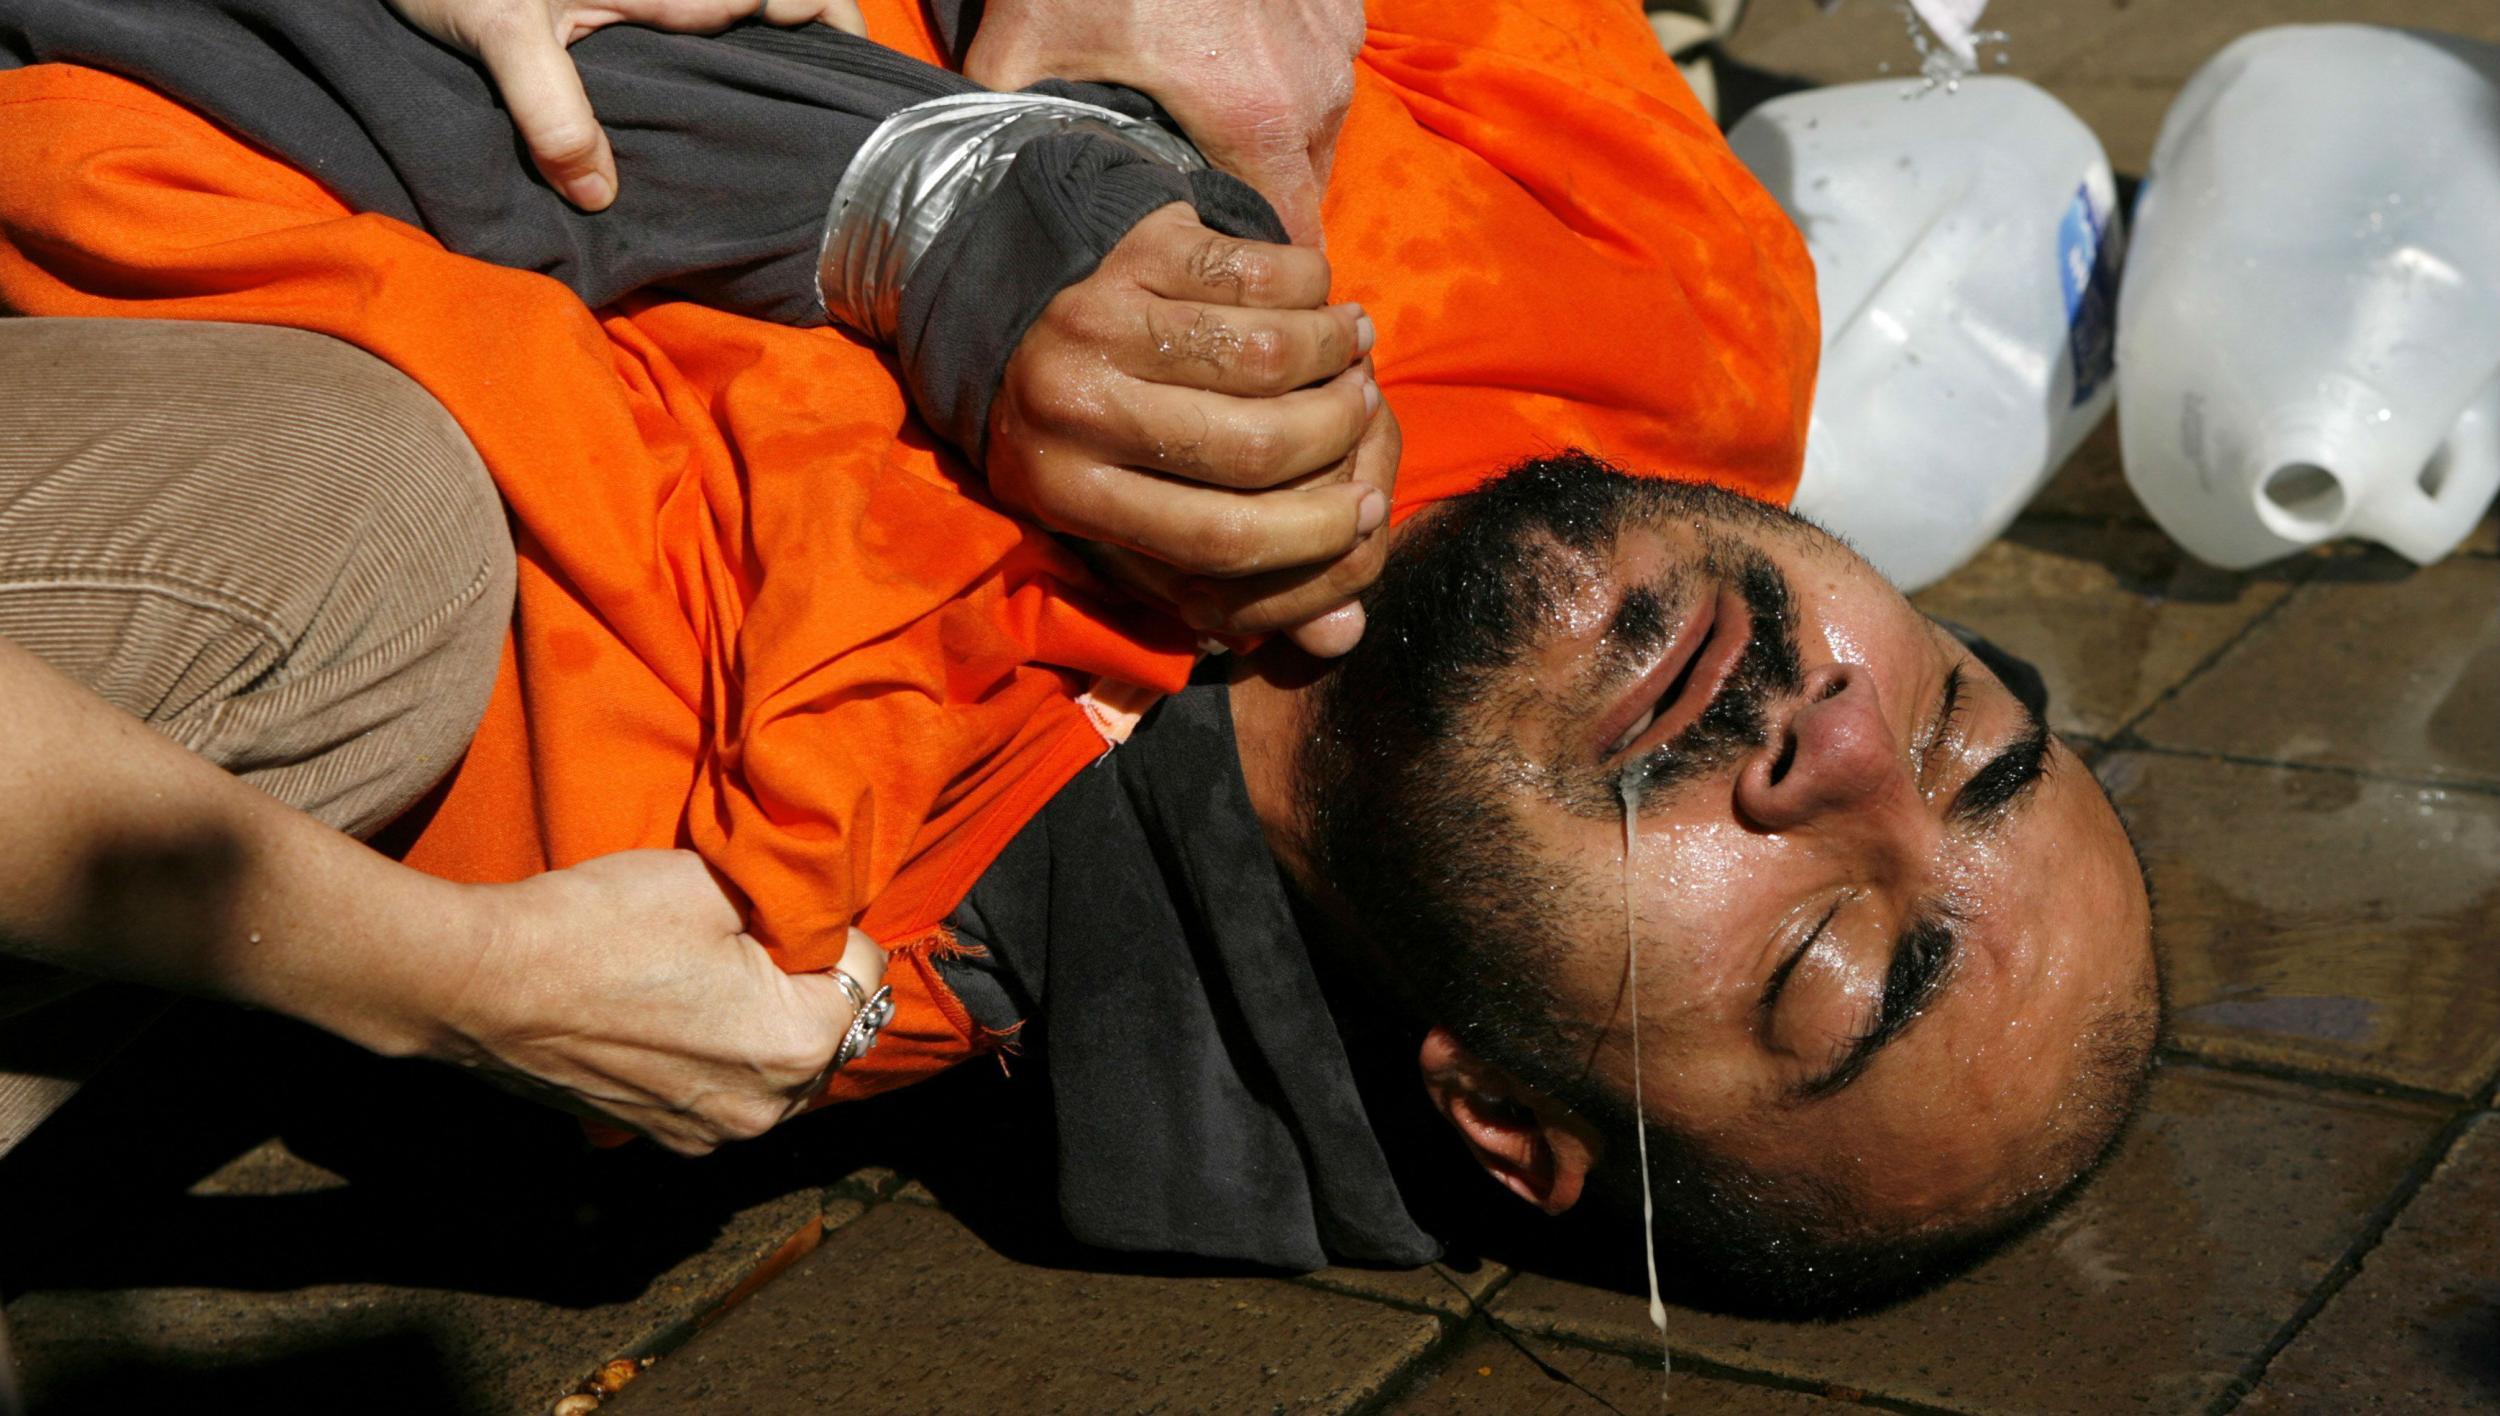 Demonstrator Maboud Ebrahimzadeh underwent a simulation of waterboarding outside the Justice Department in 2007